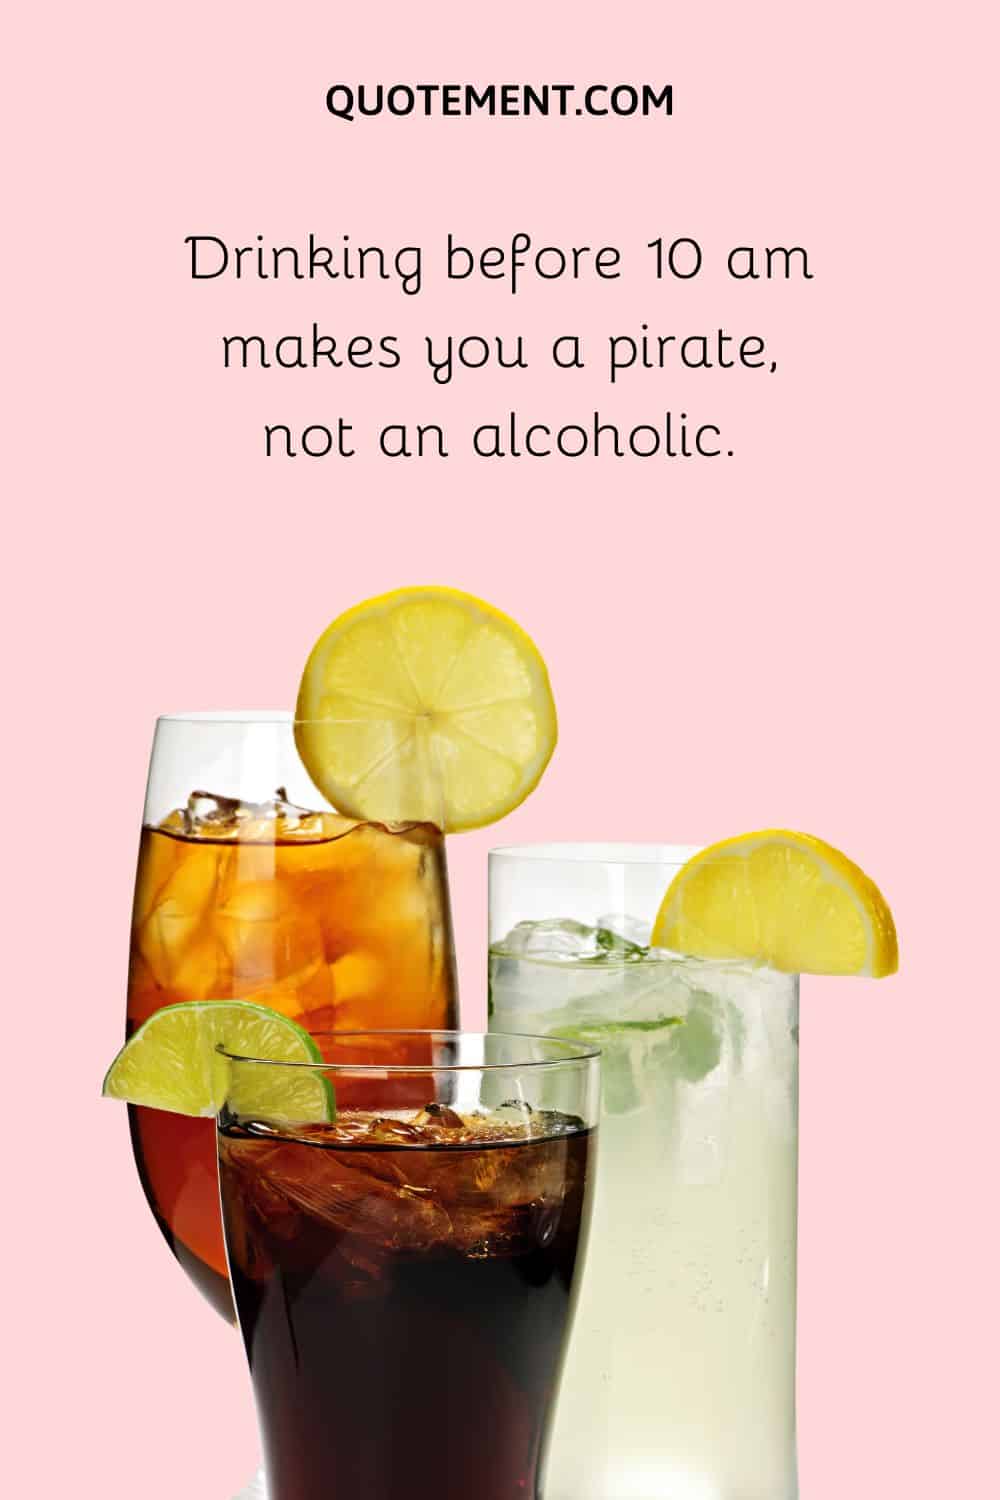 Drinking before 10 am makes you a pirate